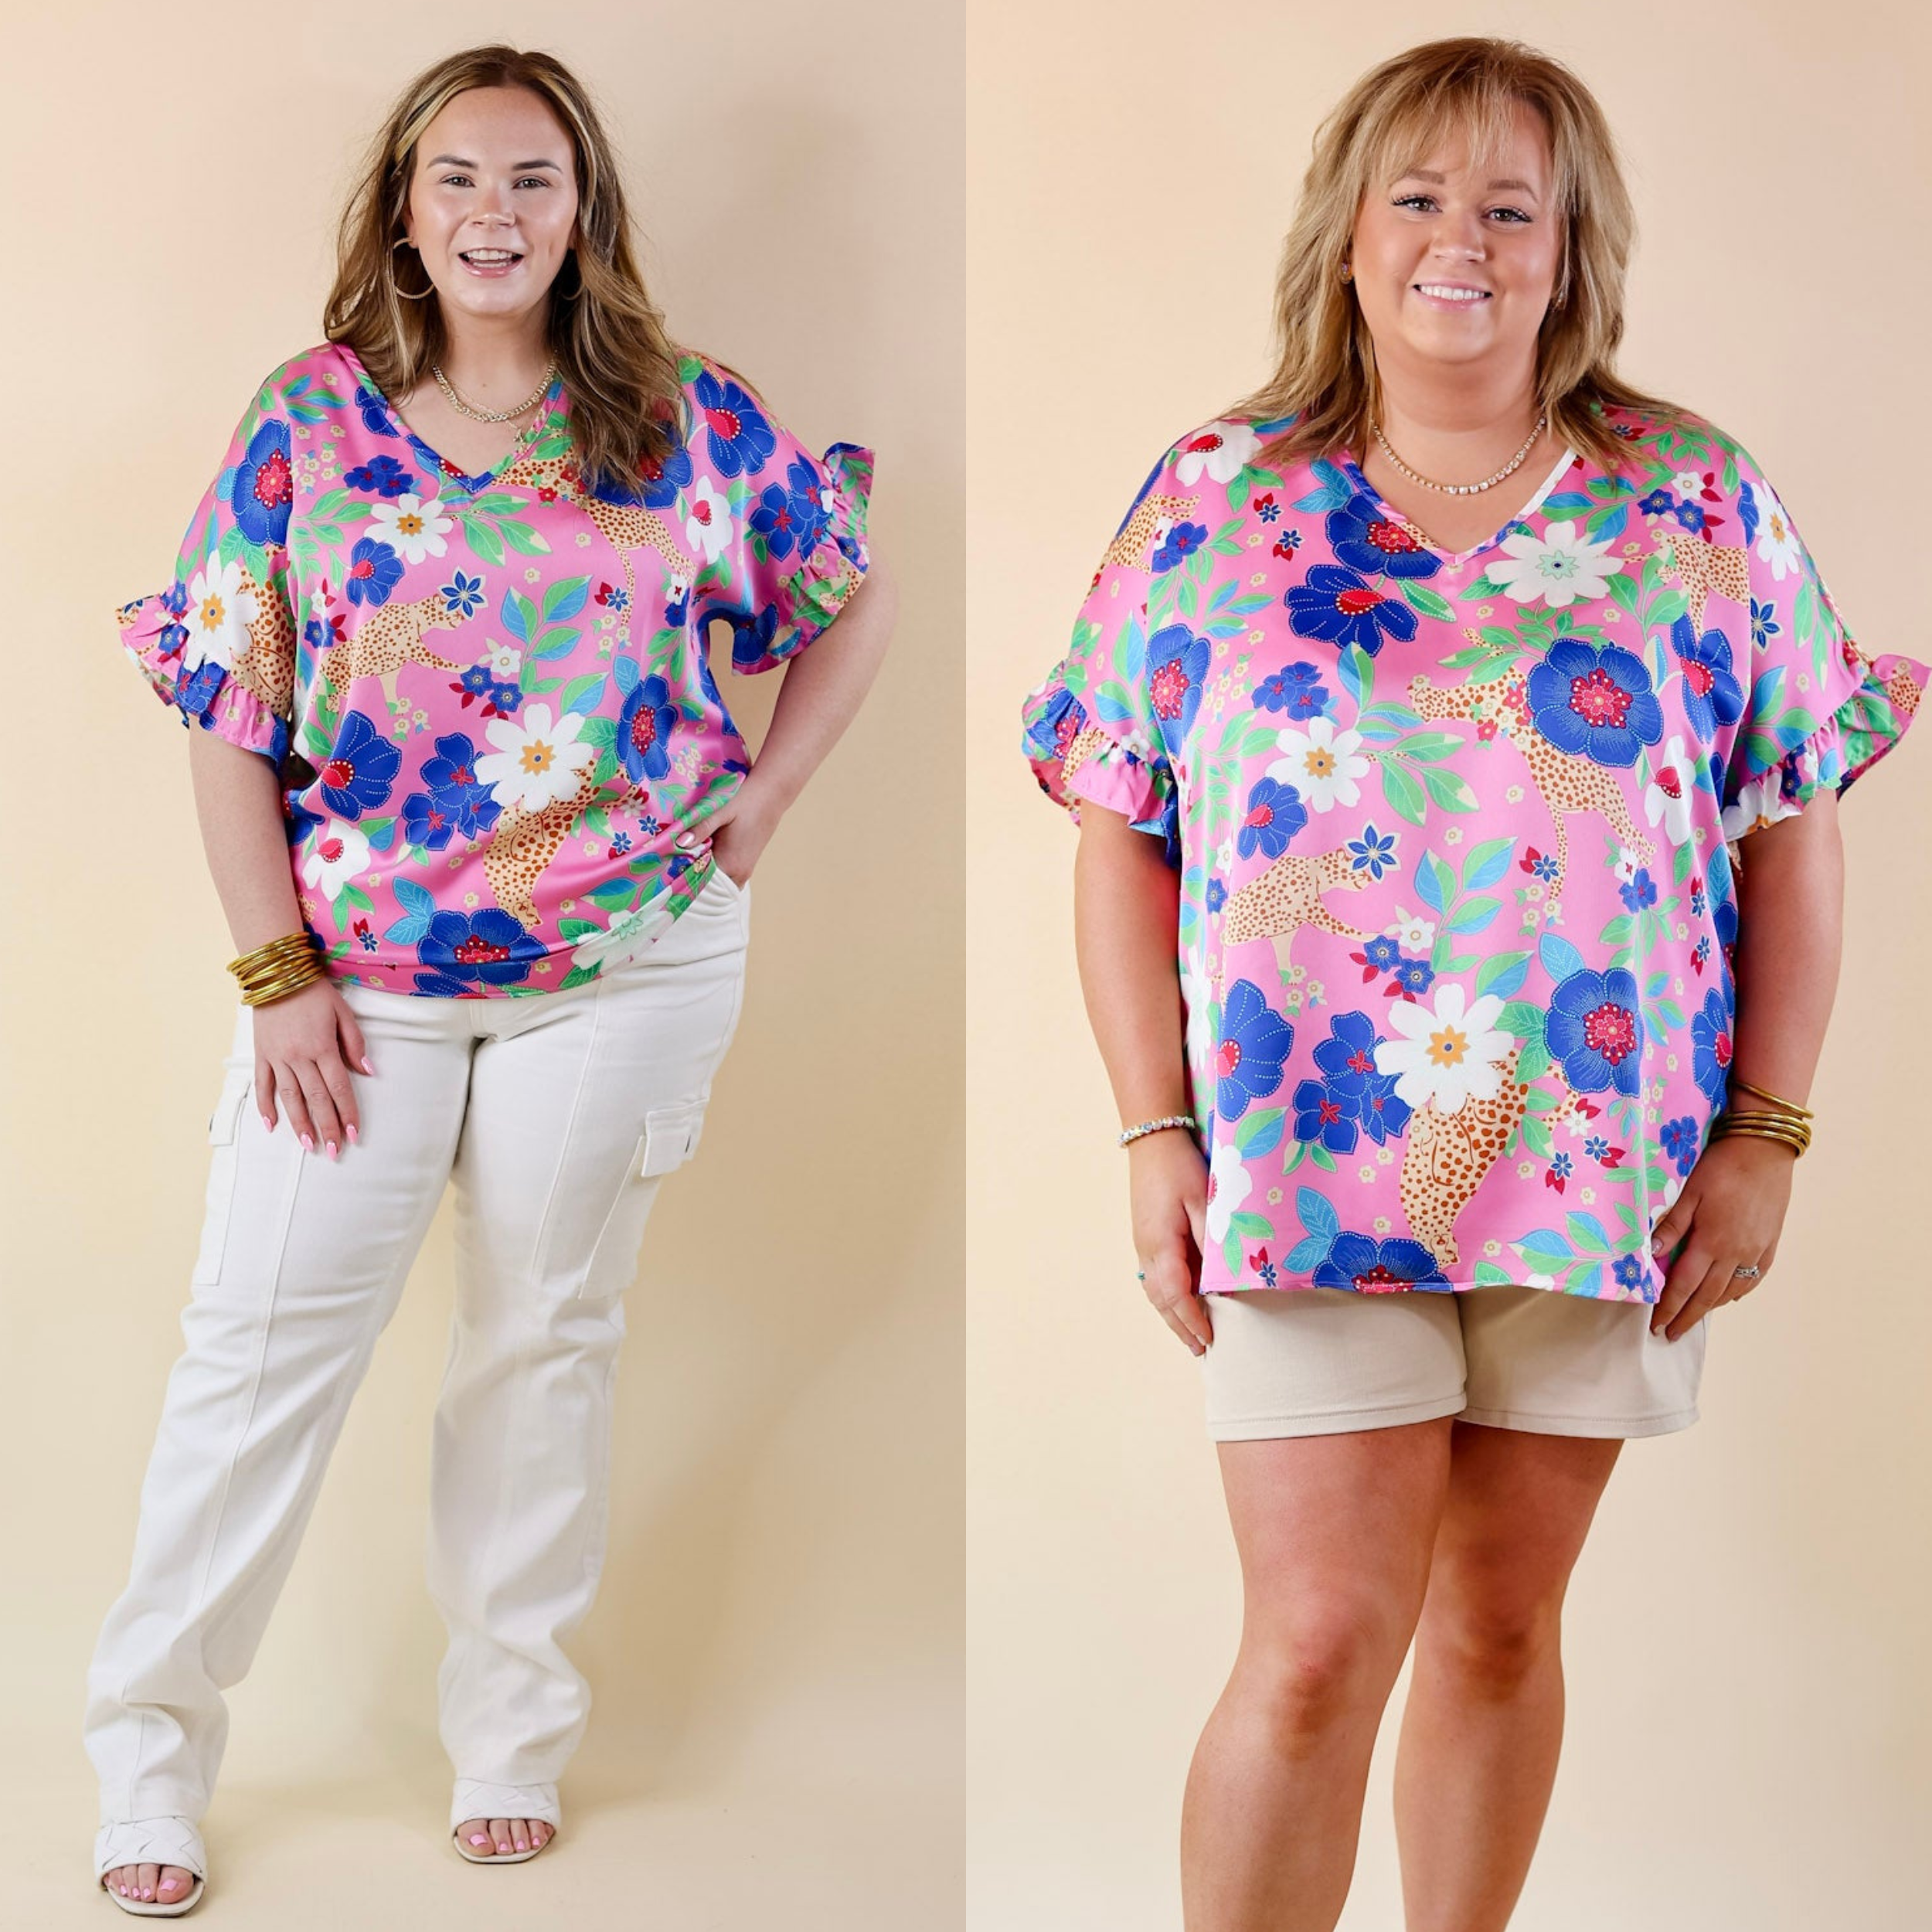 Best Version Floral and Cheetah Print V Neck Top with Ruffle Short Sleeves in Pink